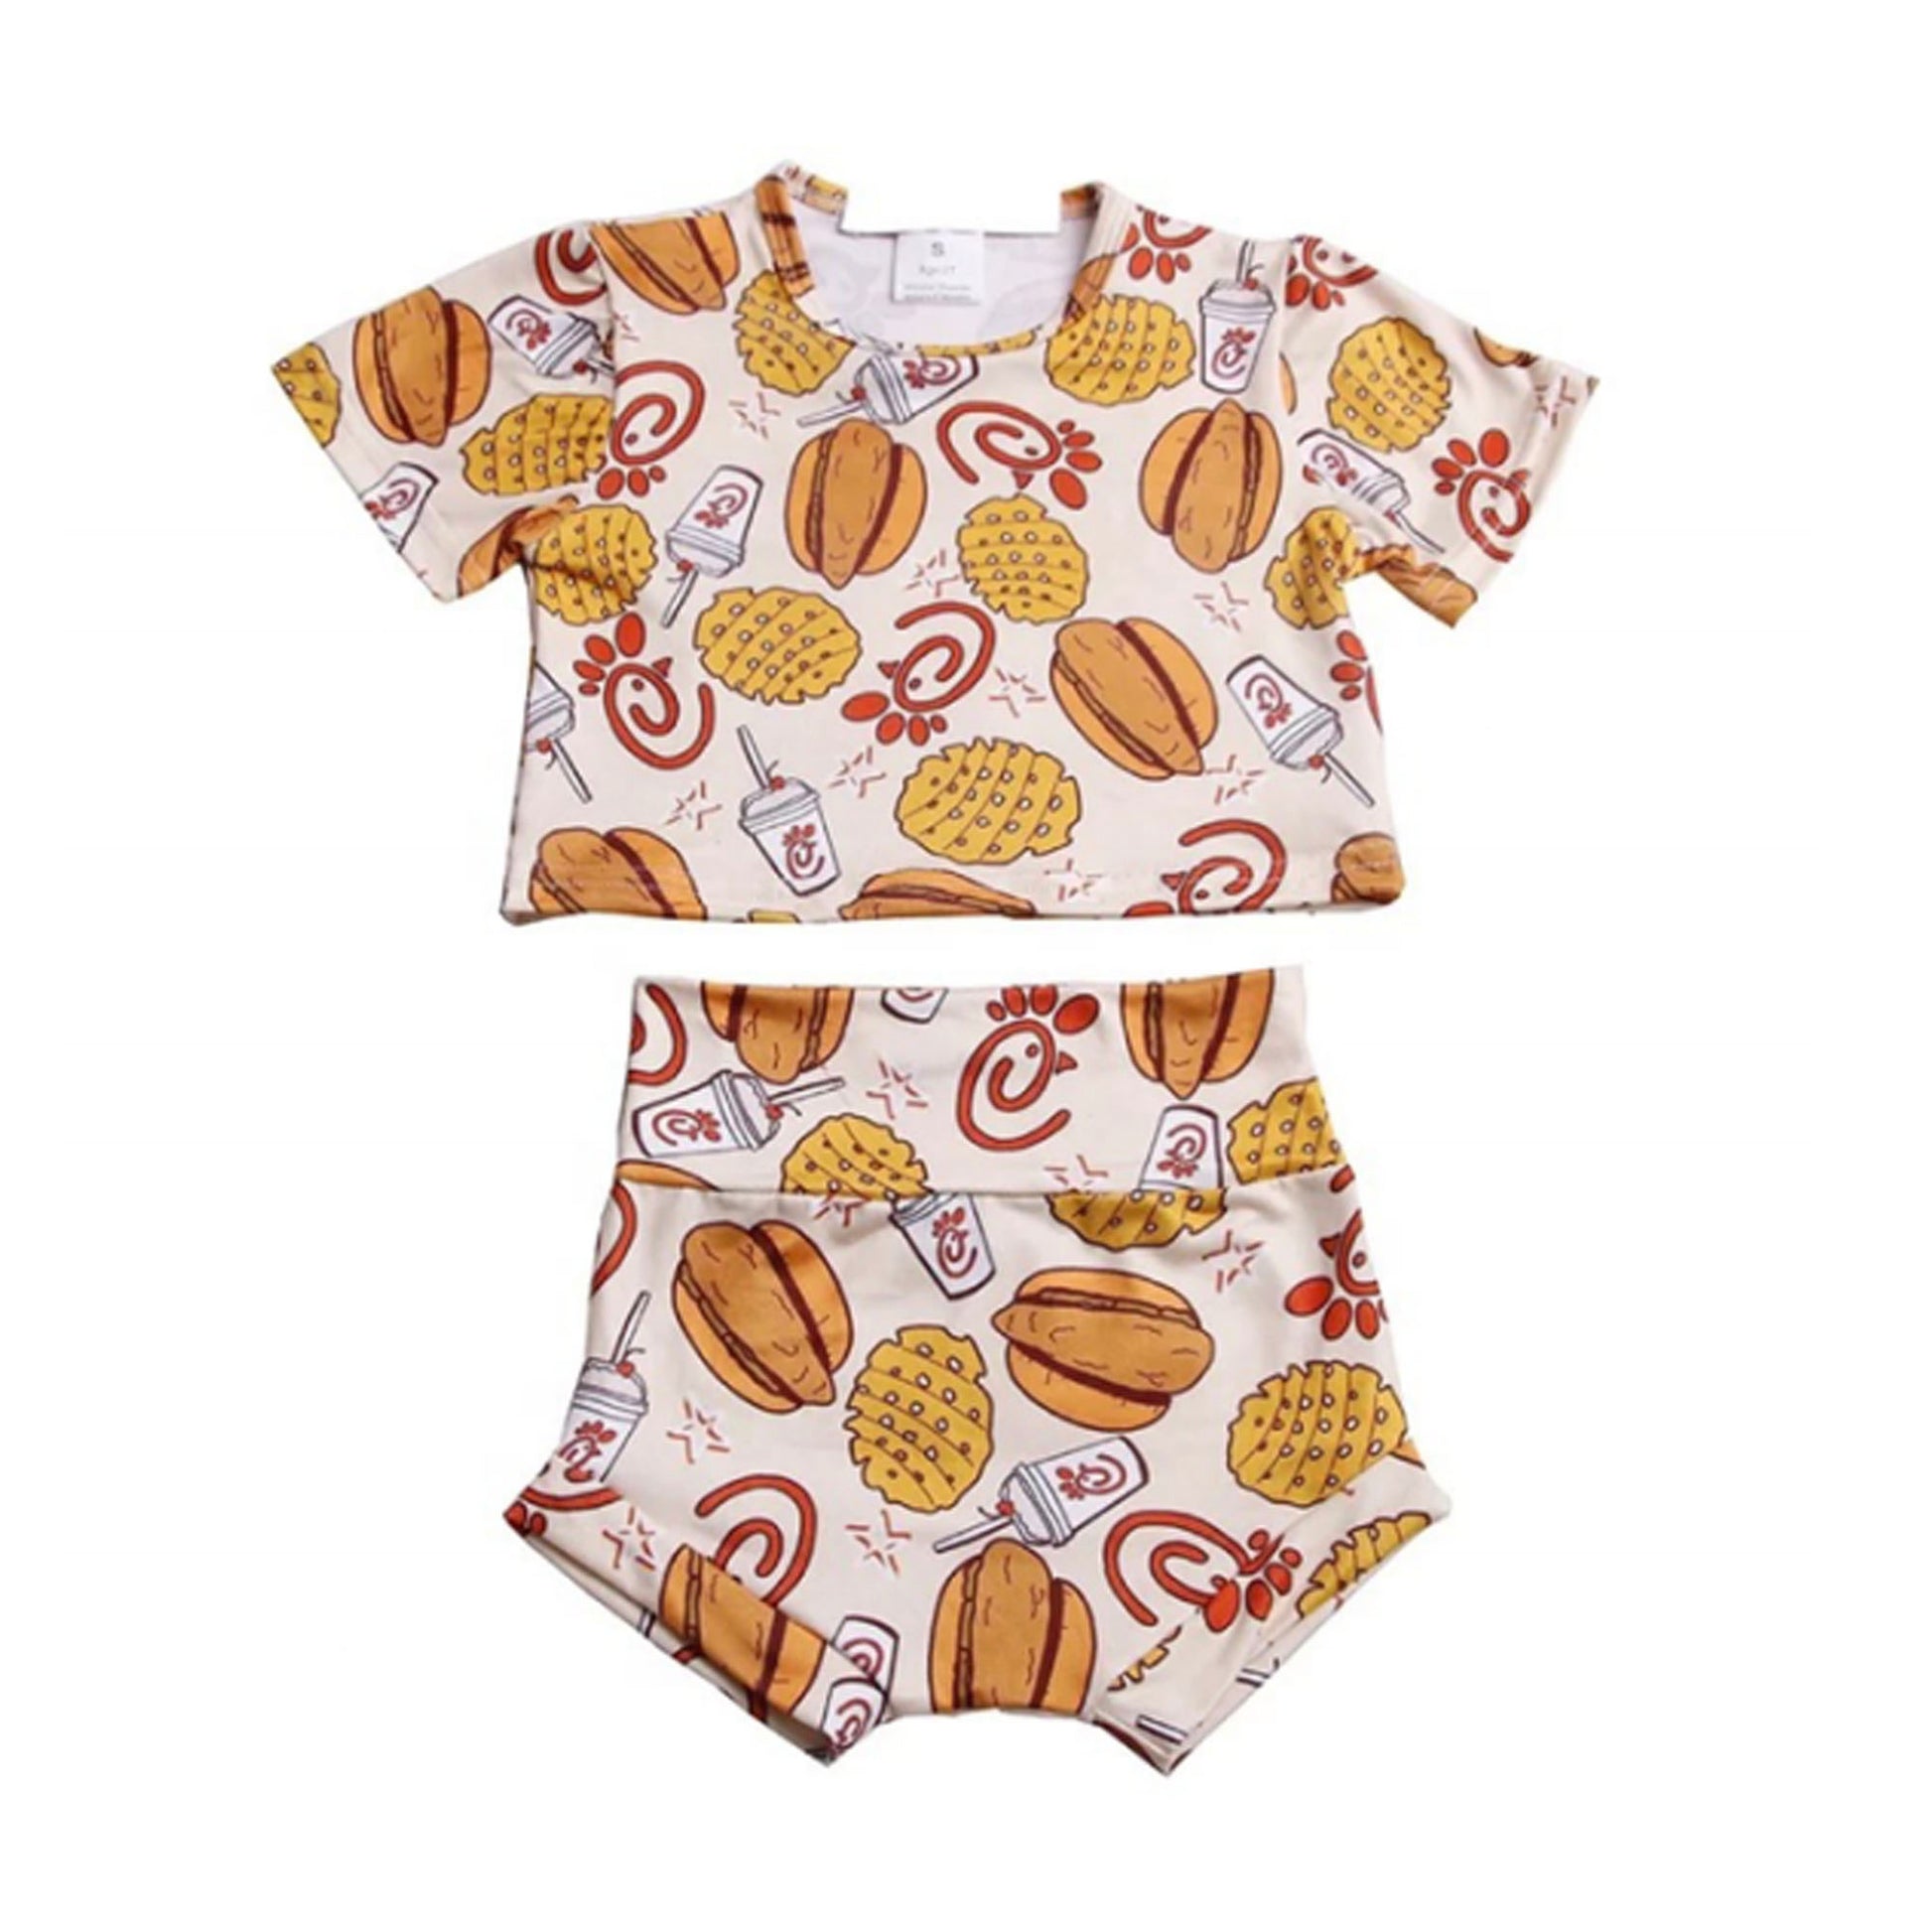 Waffle Fries Outfit - Bummies and Top-Bummies-Baby Bae Boutique